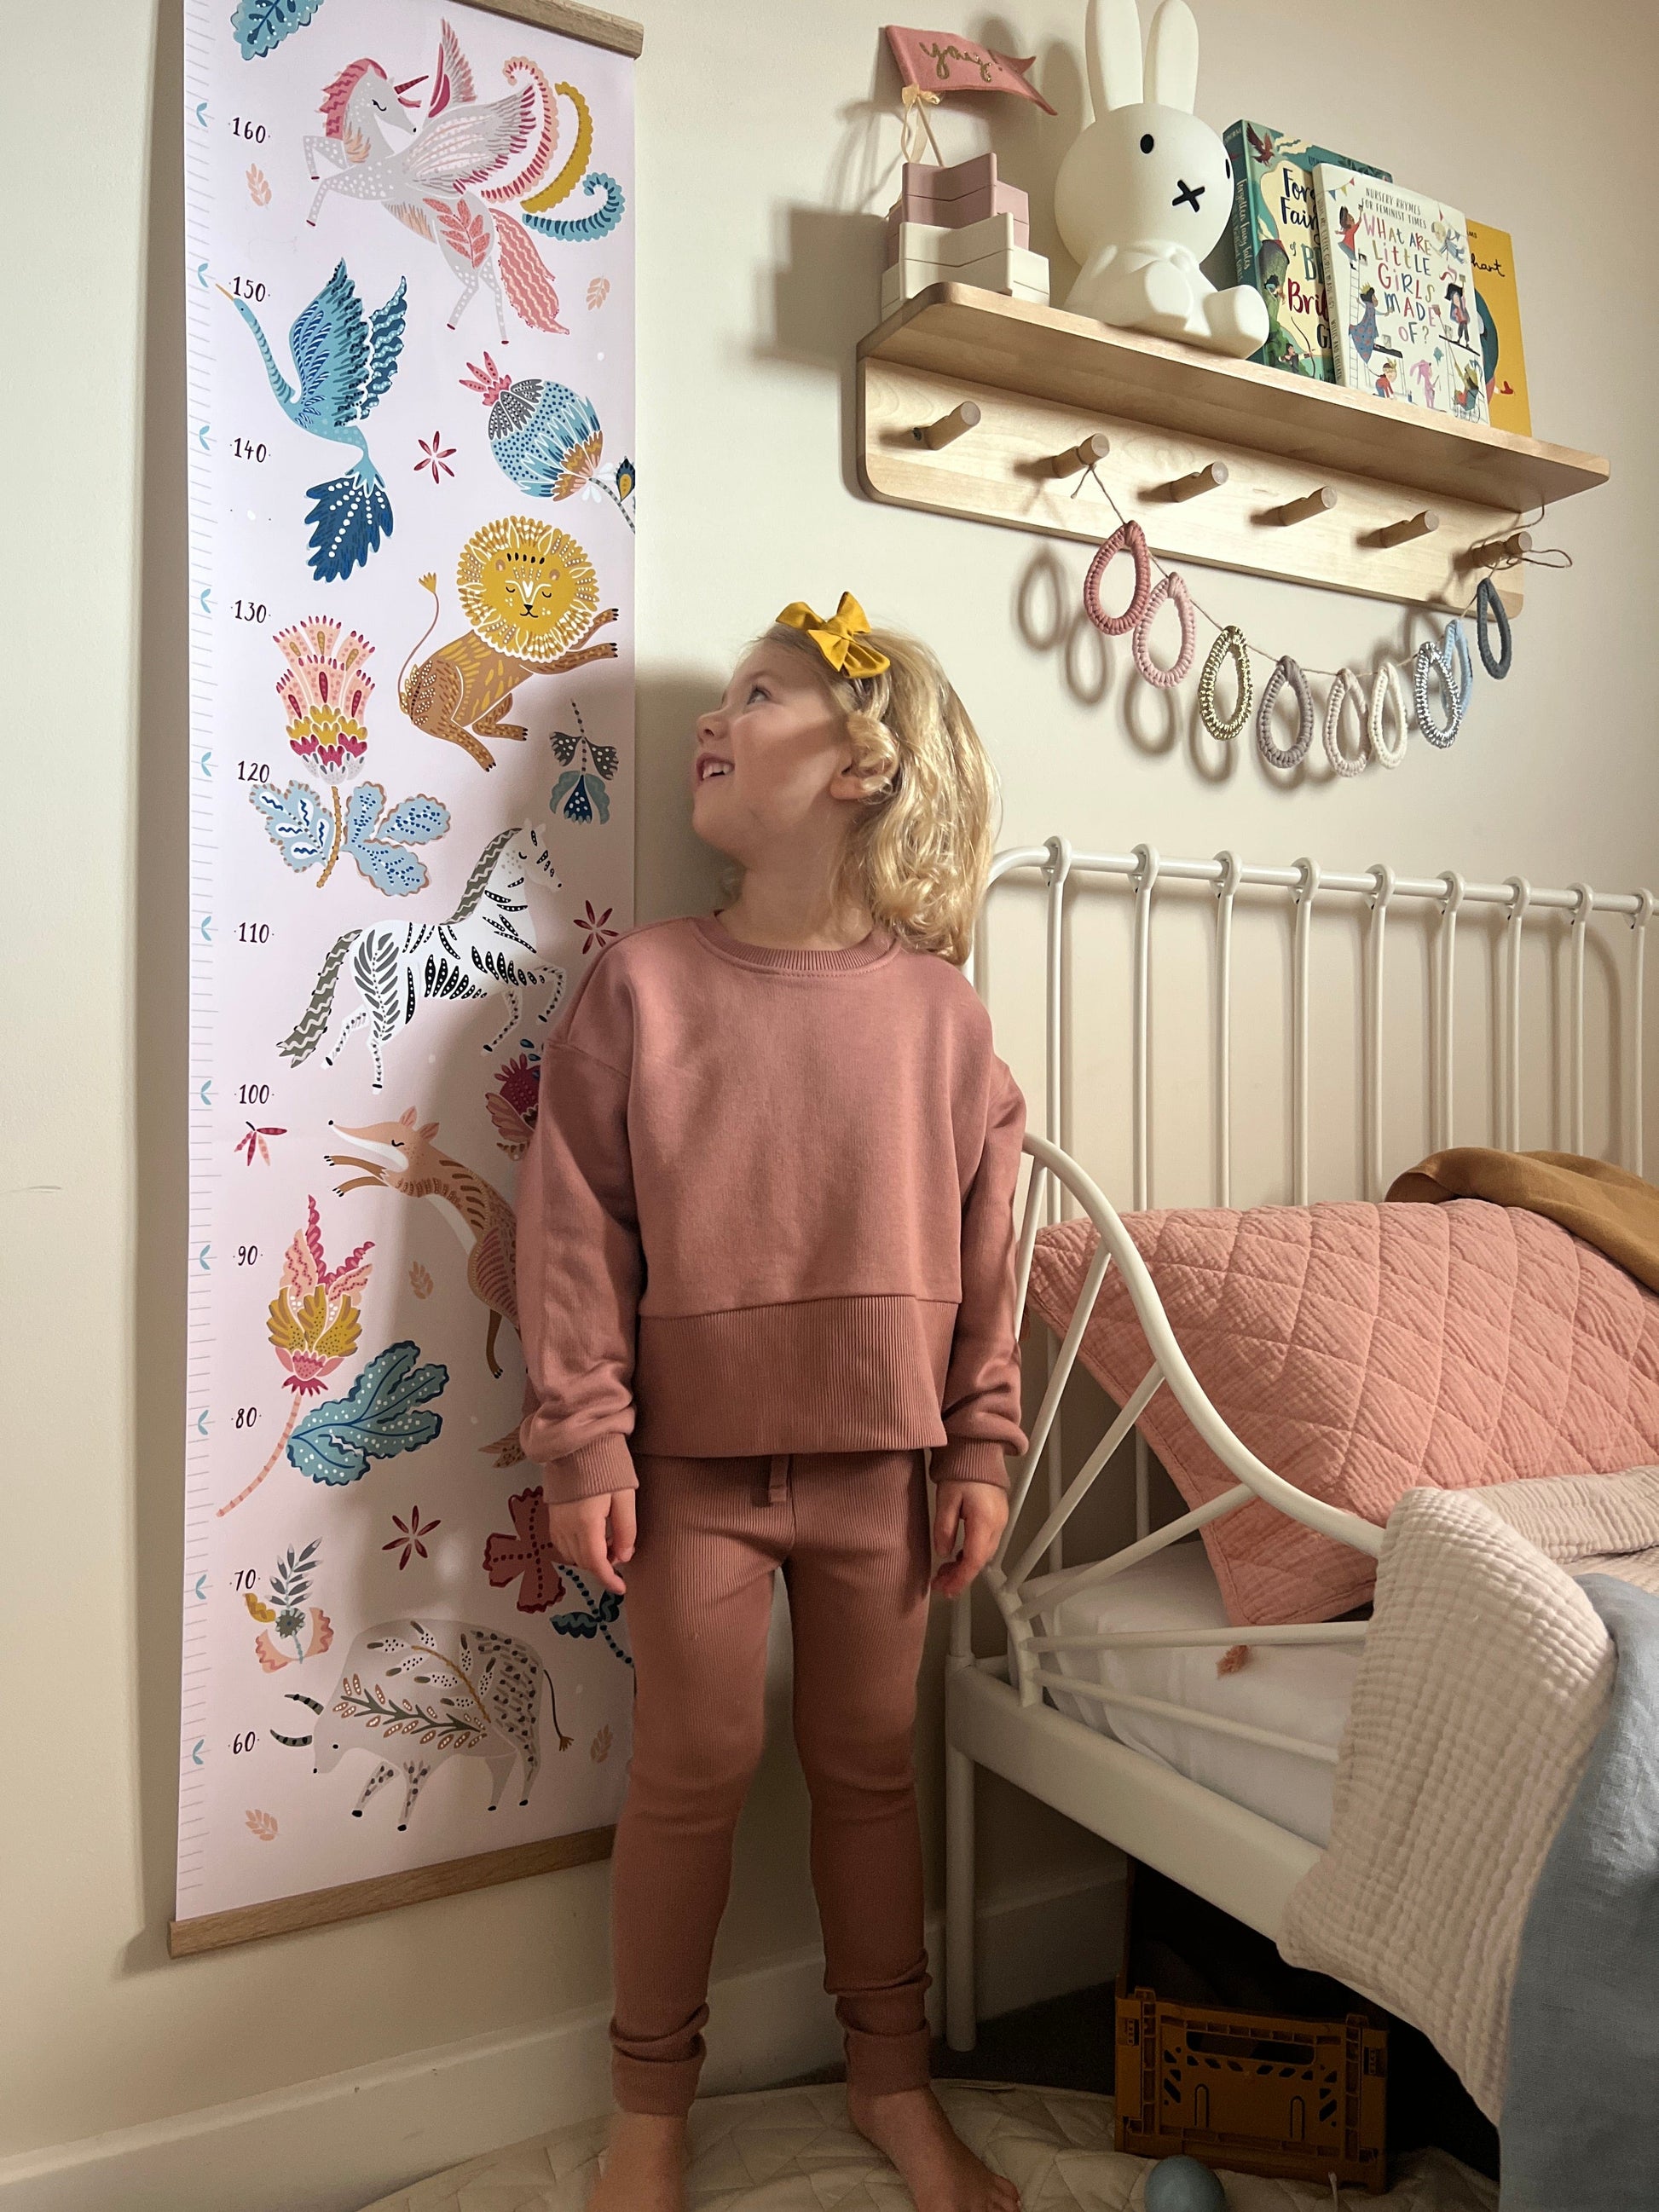 Blonde girl standing in front of the folk carnival height chart and looking back at it. Vintage metal framed bed in the background and a wooden shelf with peg hooks with a miffy lamp on it and raindrop bunting